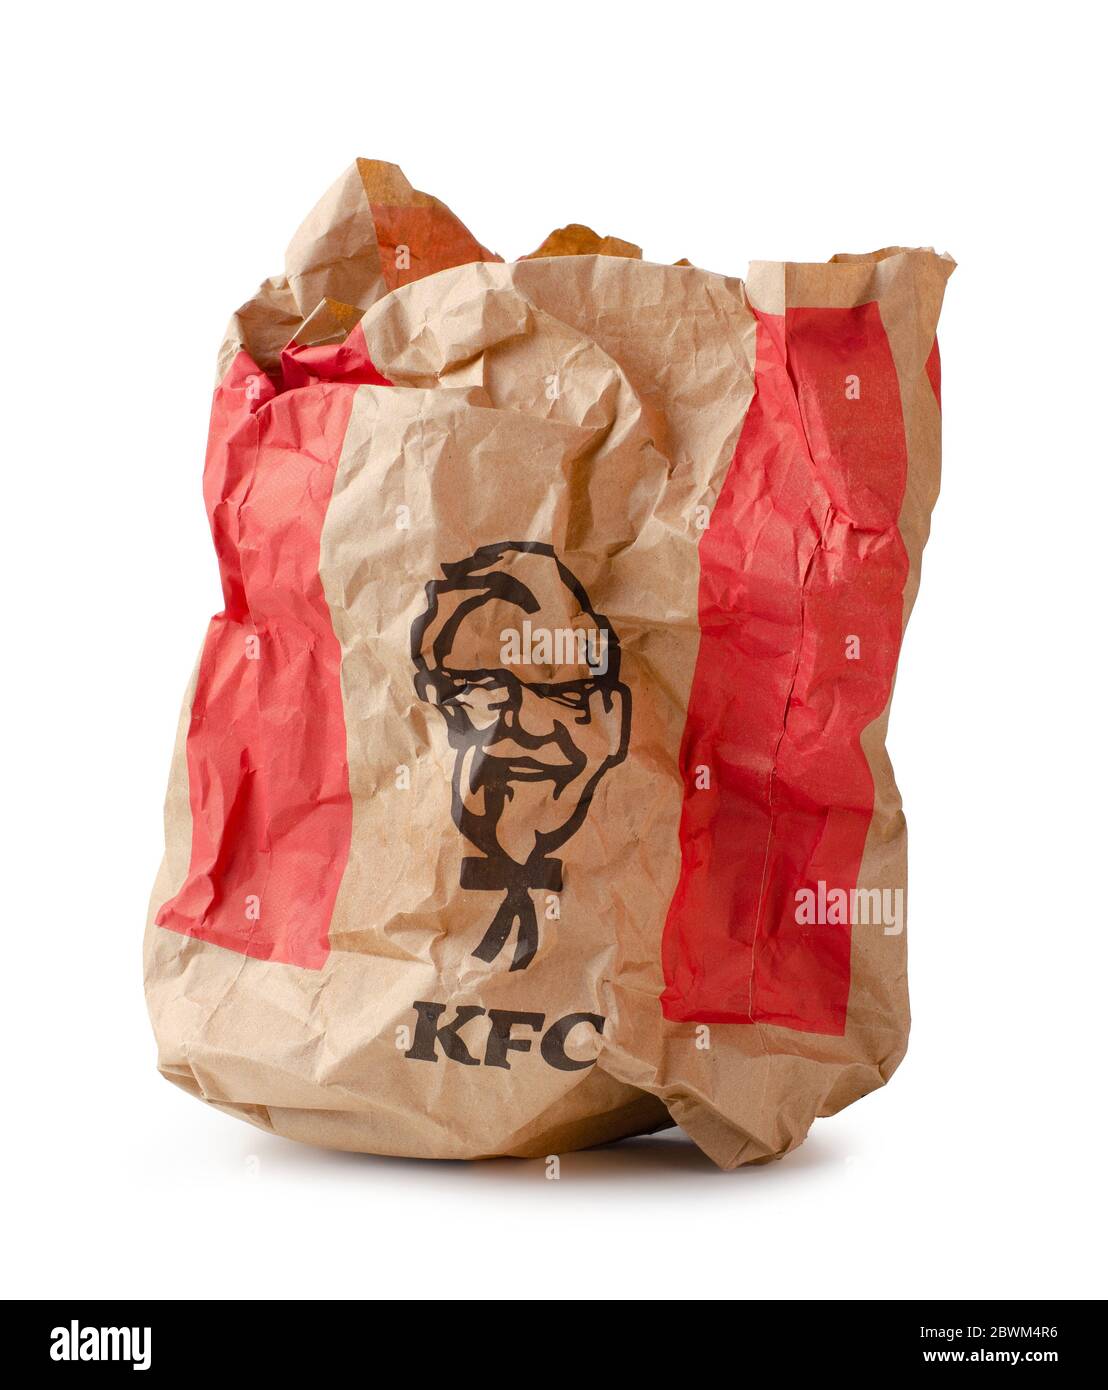 Moscow, Russia. 15.12.2019. Kentucky Fried Chicken crumpled paper bag isolated on a white background. KFC is a fast food restaurant chain headquartere Stock Photo